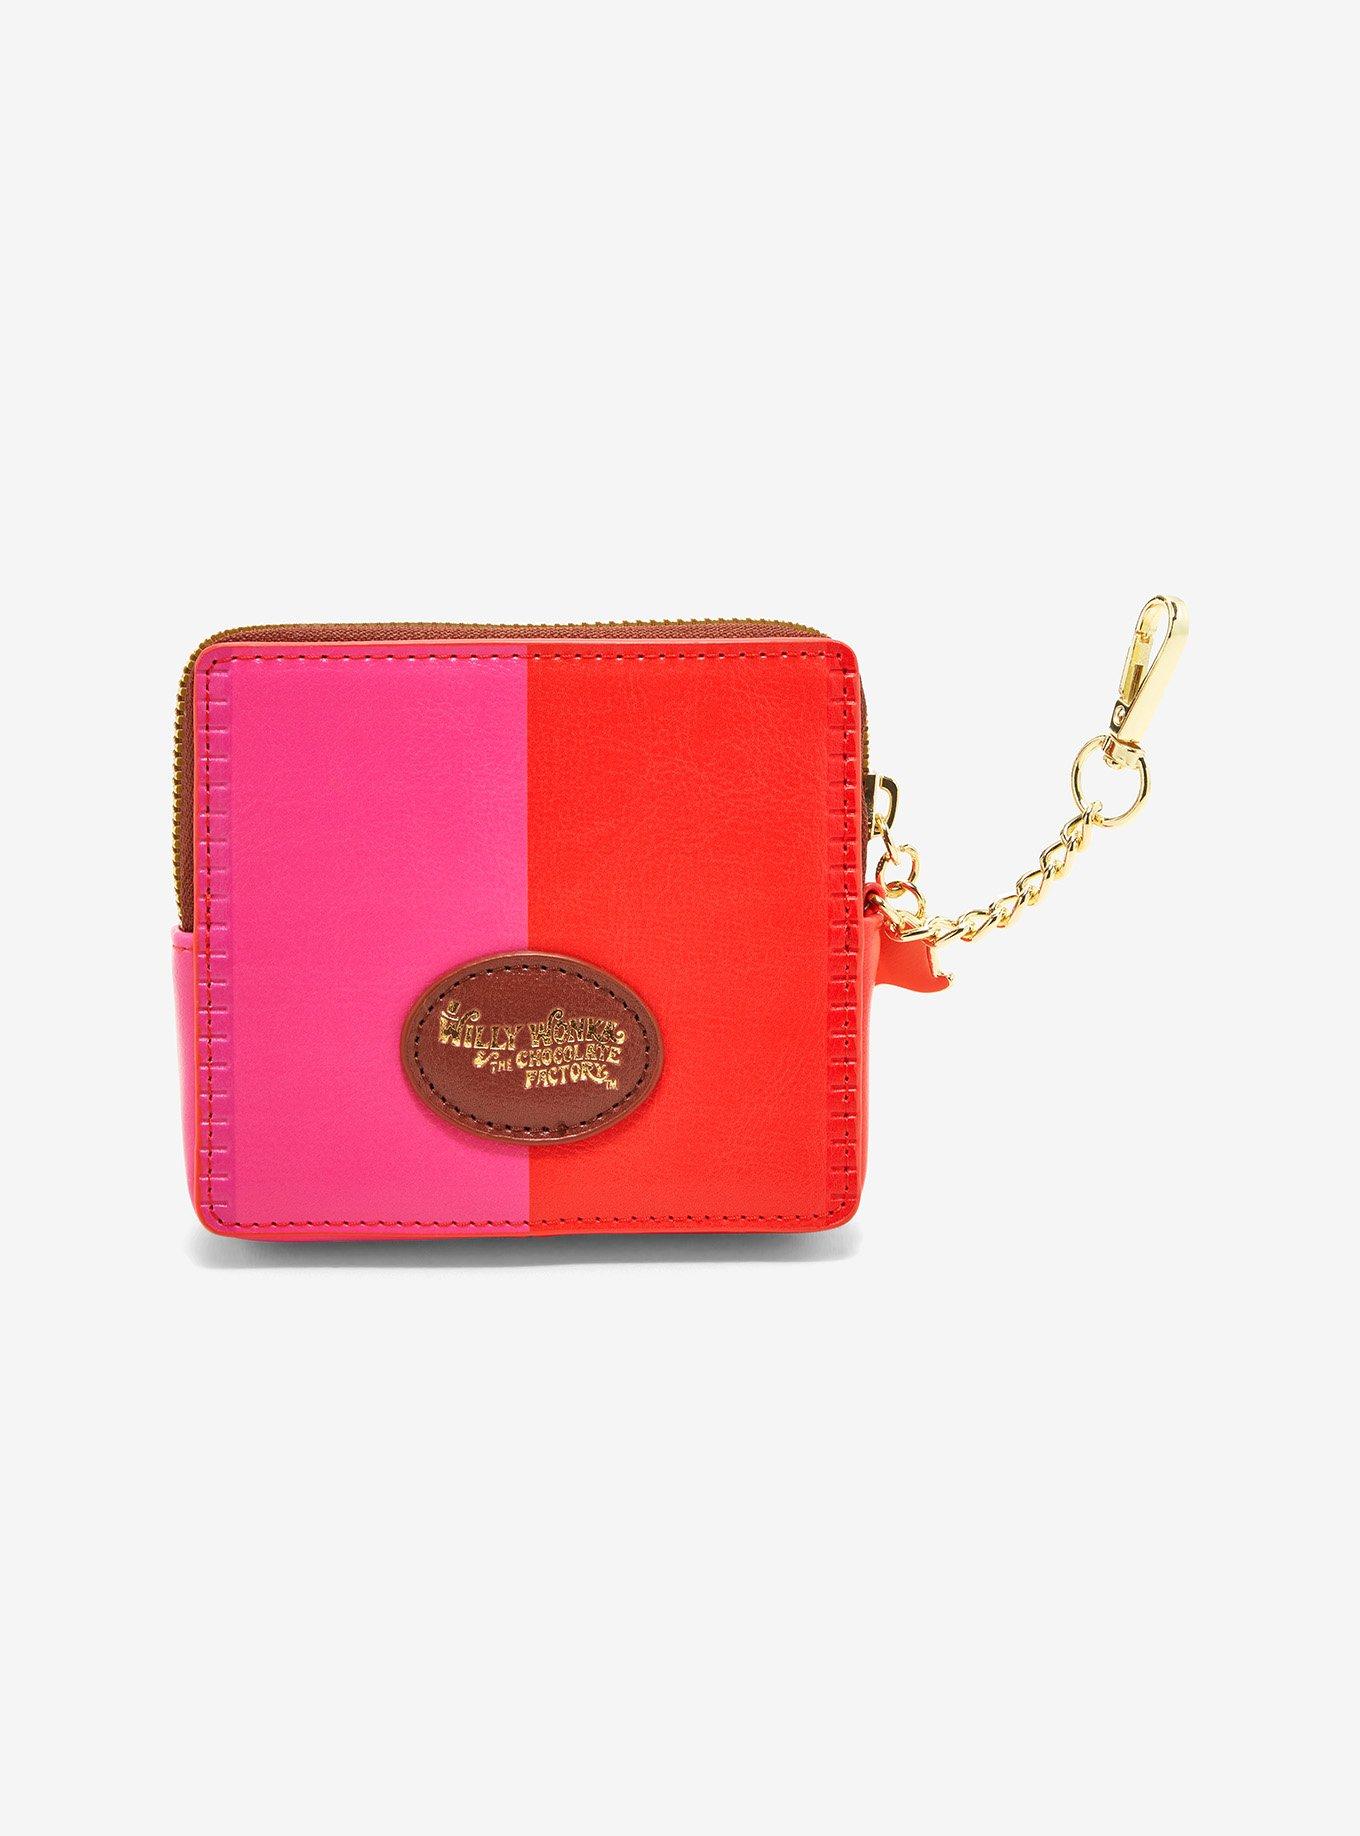 Willy Wonka & The Chocolate Factory Wonka Bar Coin Purse | Hot Topic